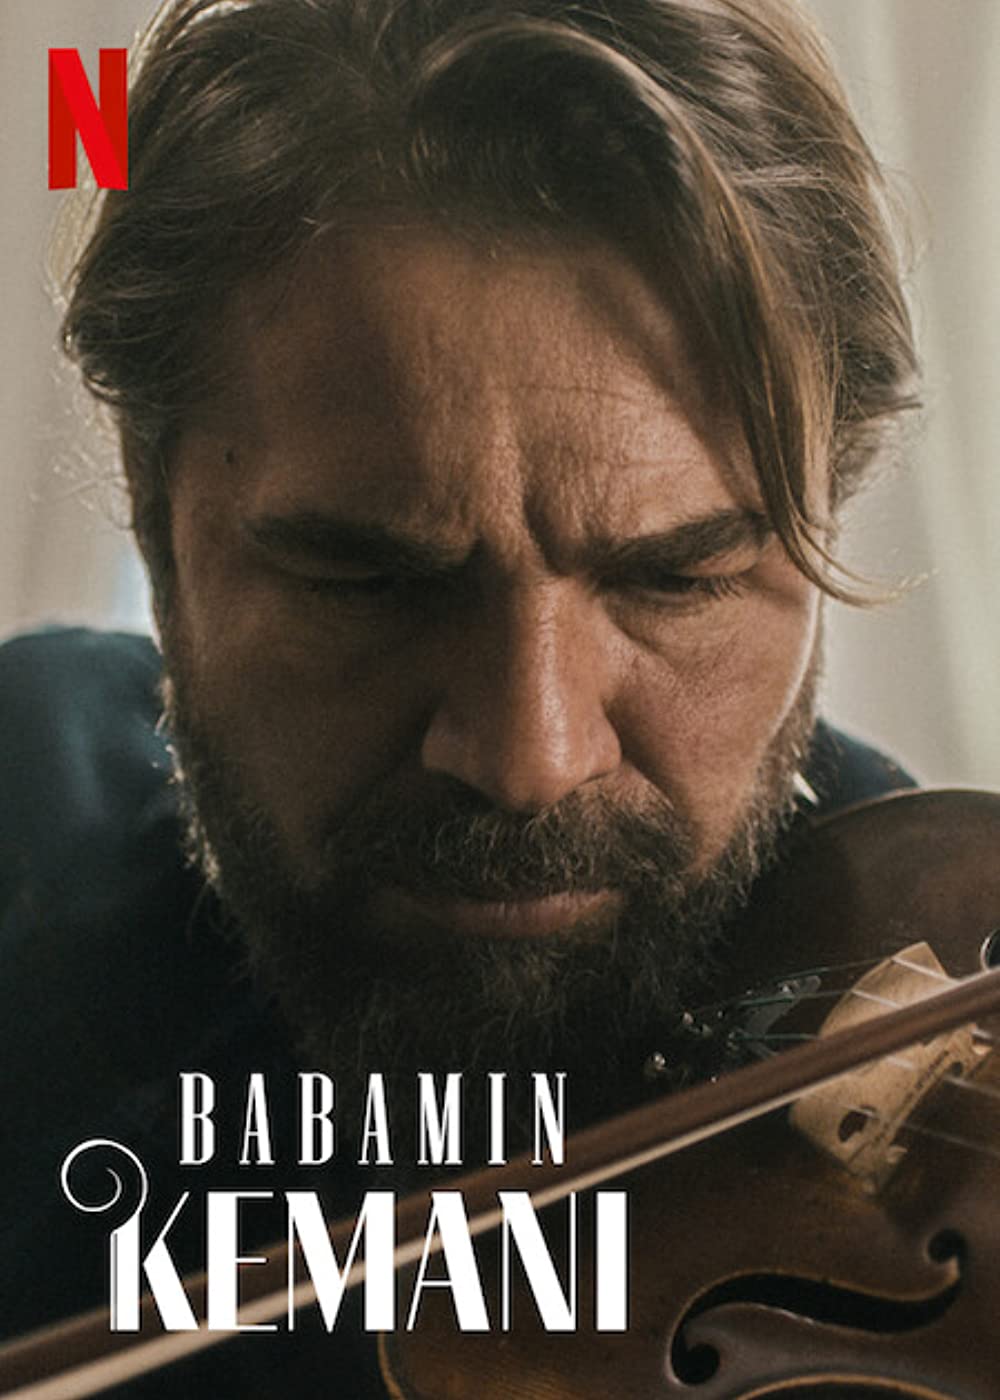 Is “My Father's Violin” on Netflix